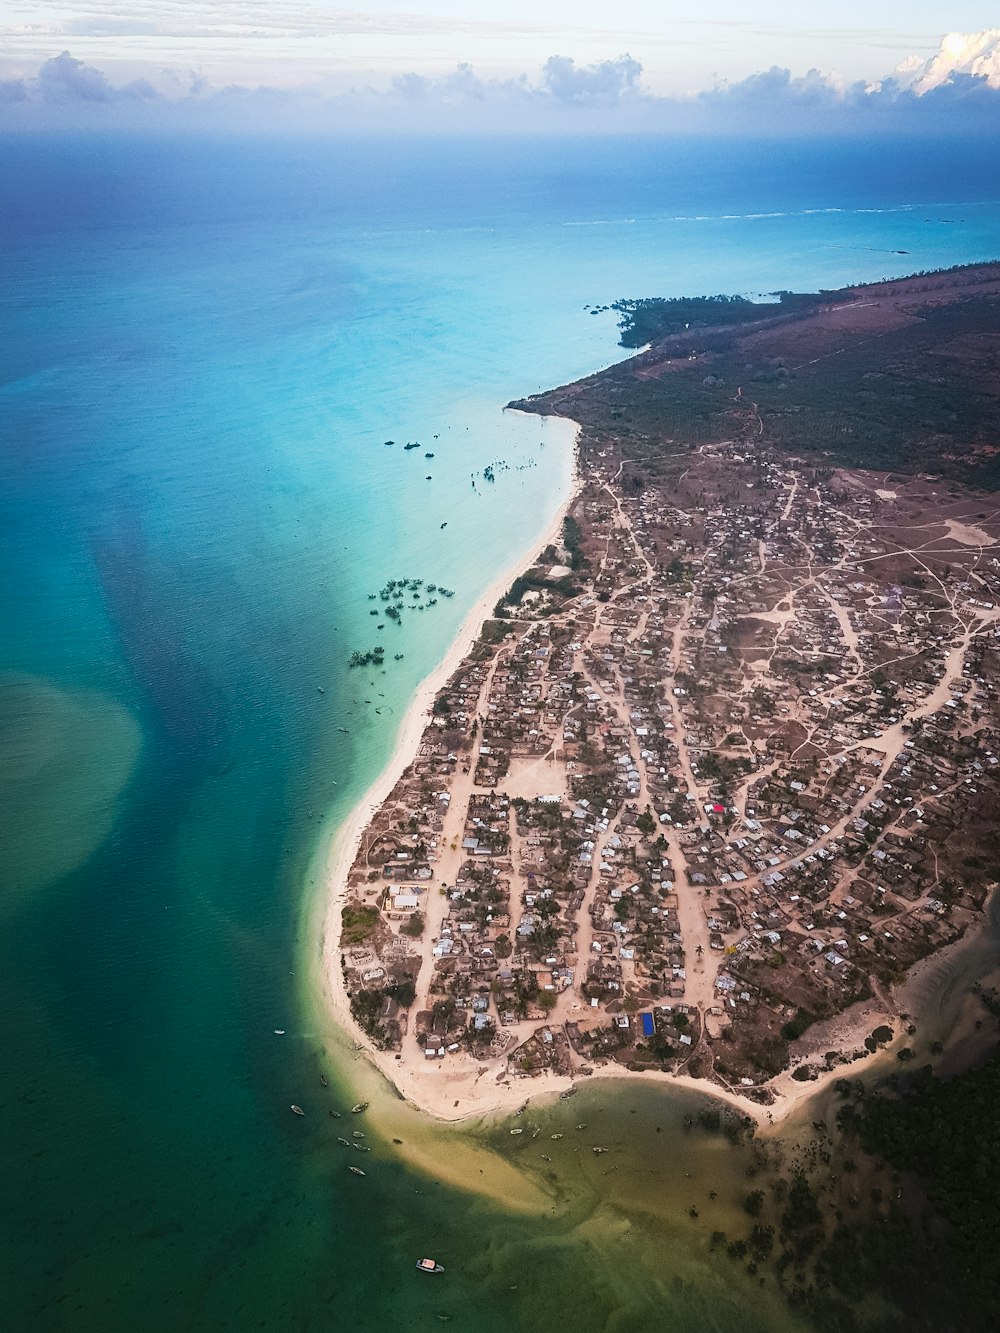 an aerial view of a small town on a beach